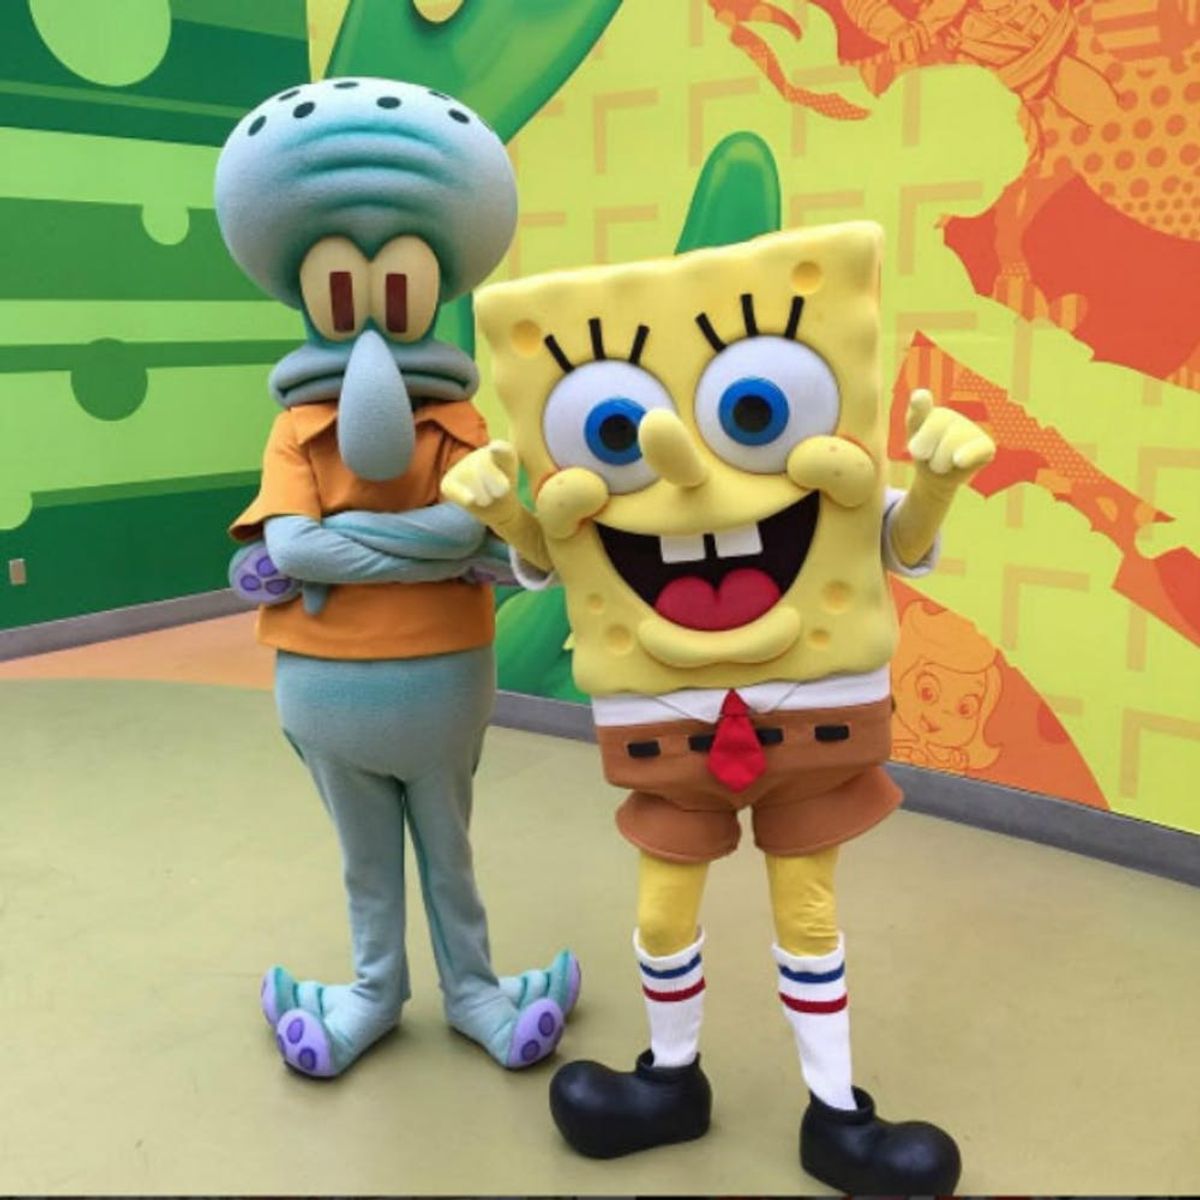 A New Nickelodeon Theme Park Is Happening and It’s Going to Be Huge